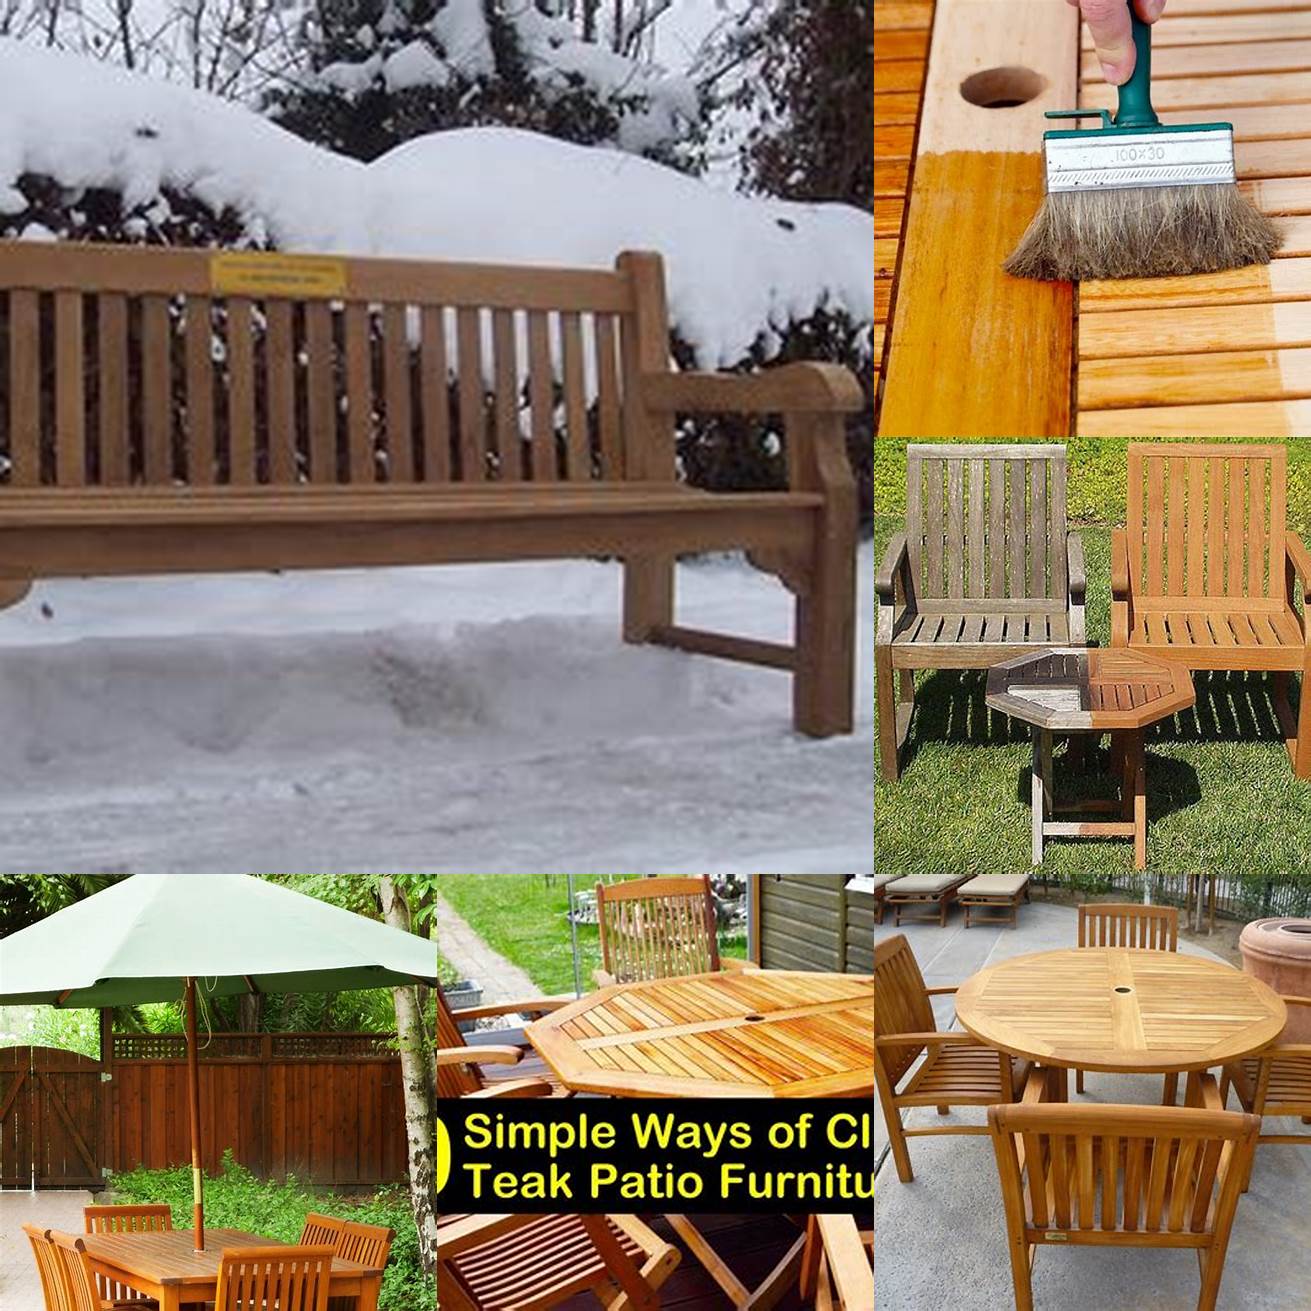 Caring for Teak Furniture in the Winter